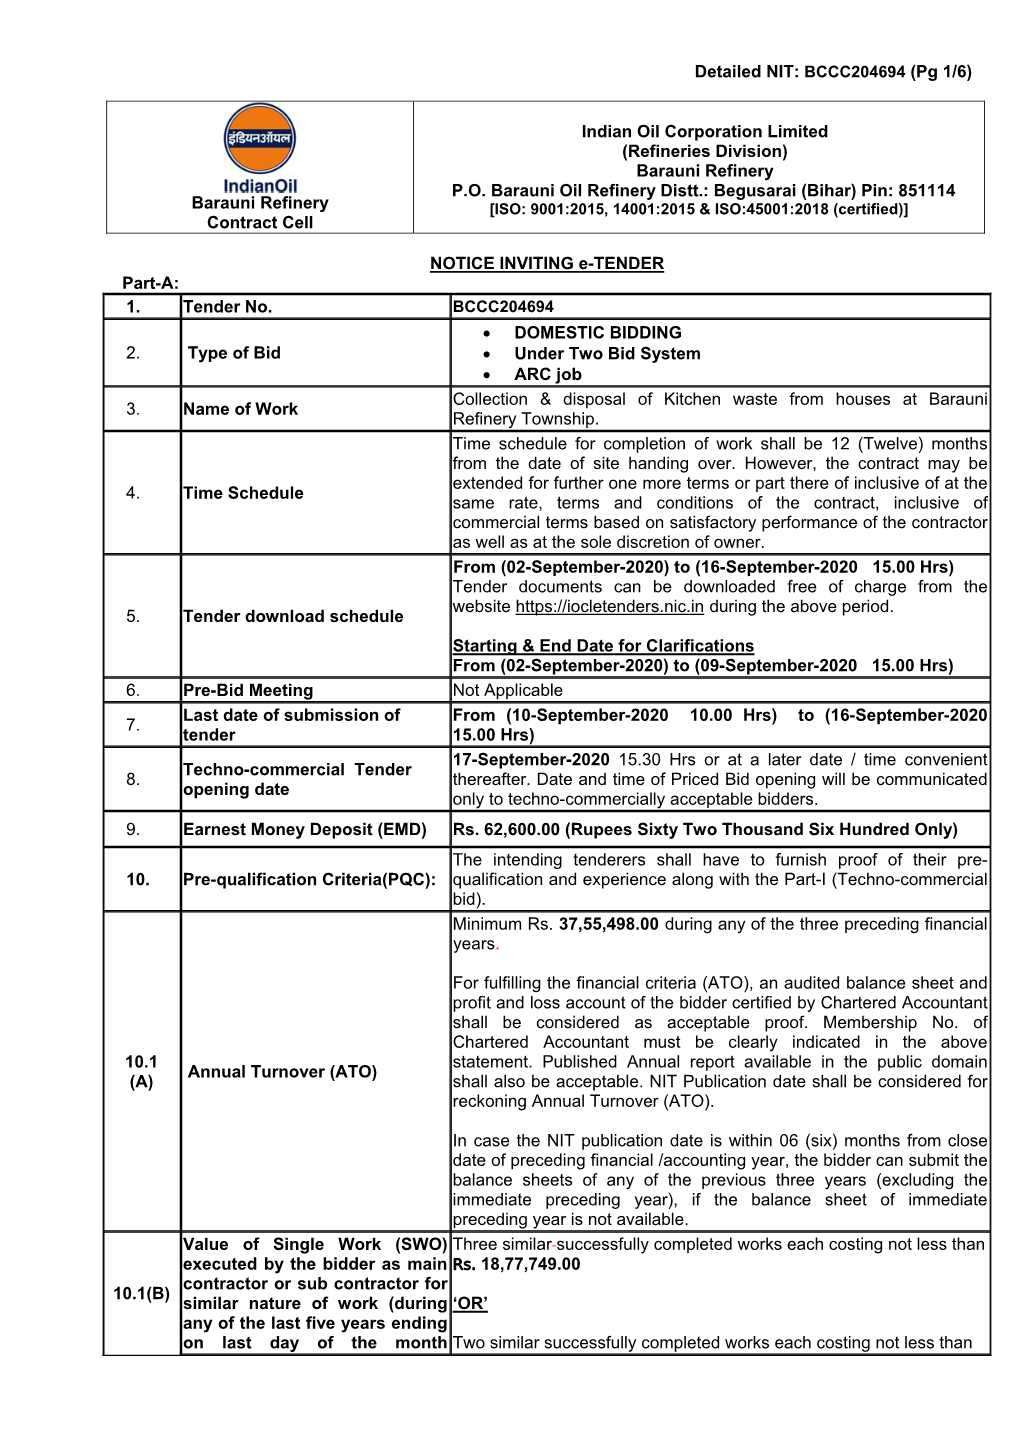 Detailed NIT: BCCC204694 (Pg 1/6) Barauni Refinery Contract Cell